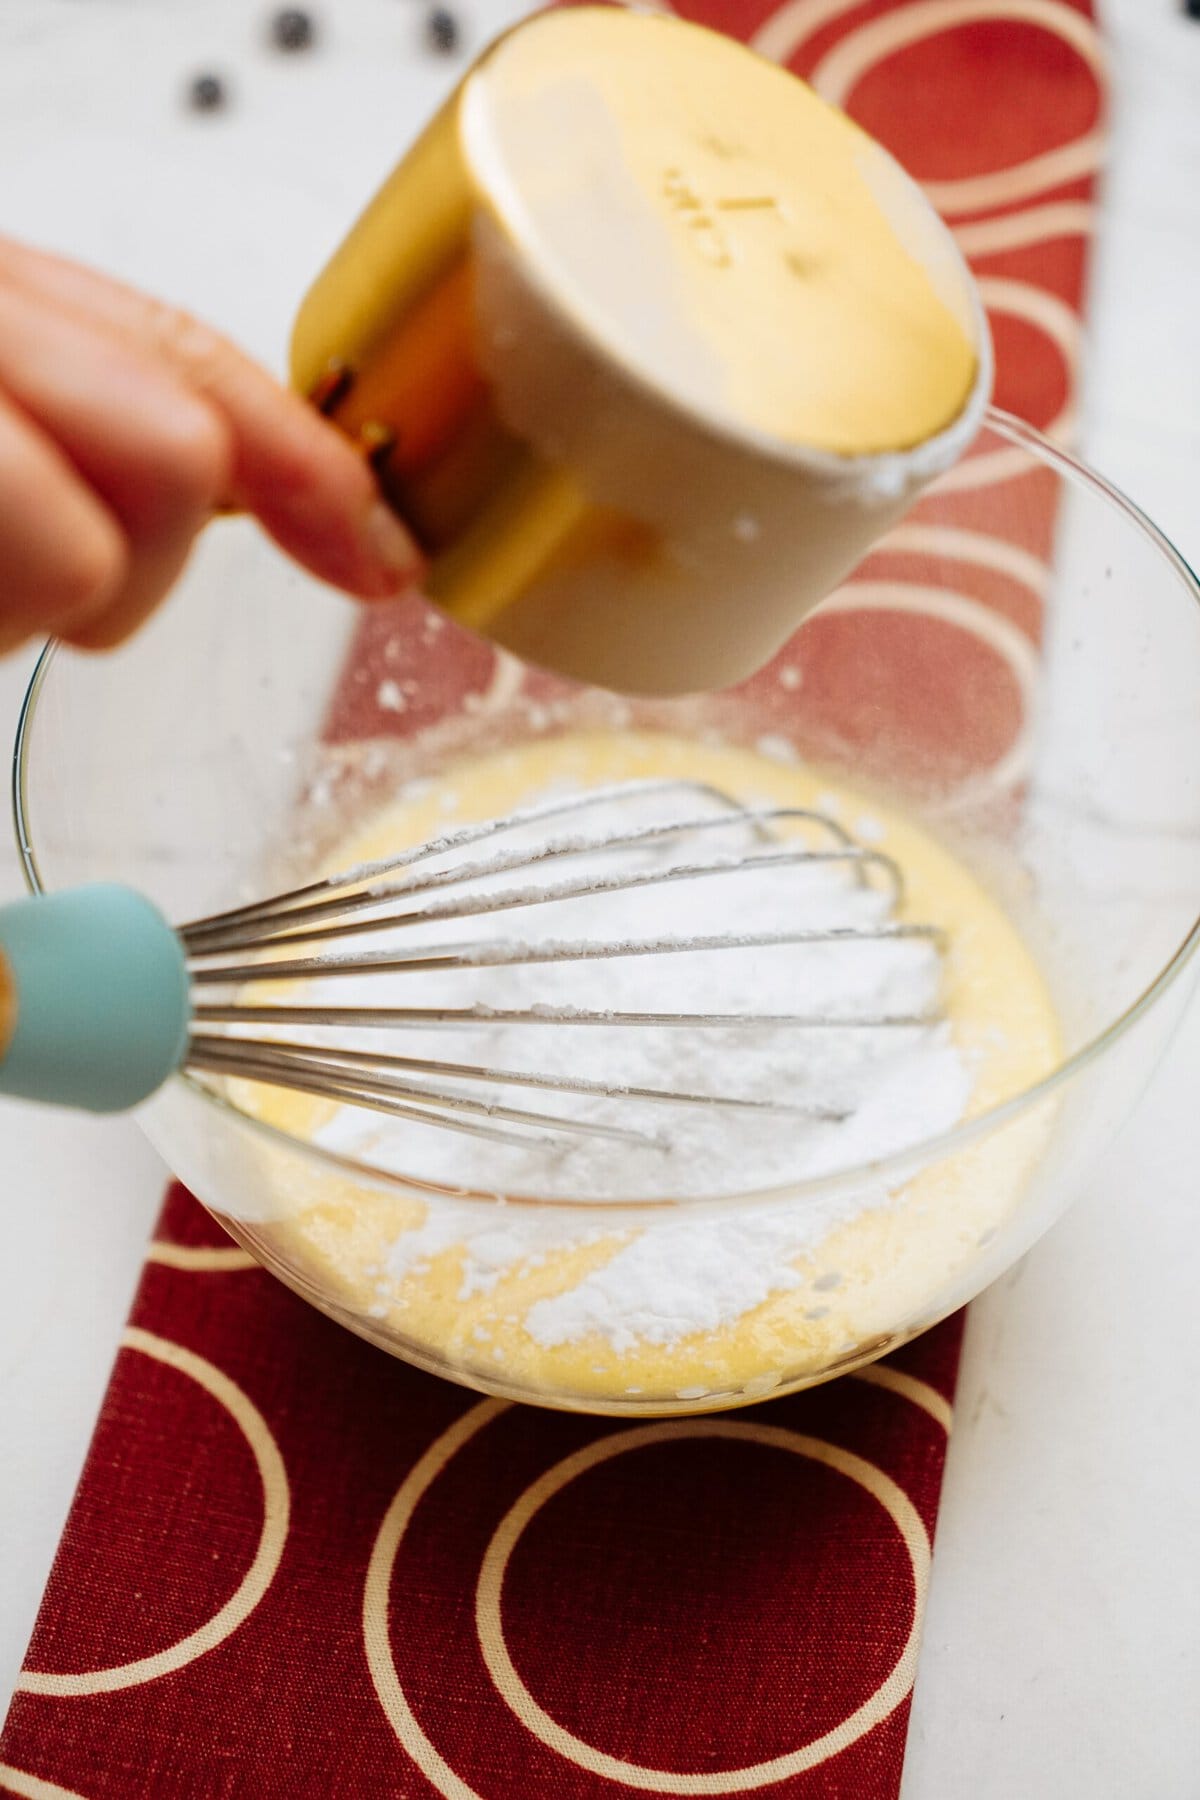 A hand is pouring powdered sugar from a measuring cup into a glass bowl containing a whisk and yellow batter, resting on a red and white patterned cloth, as if preparing for homemade cinnamon rolls.